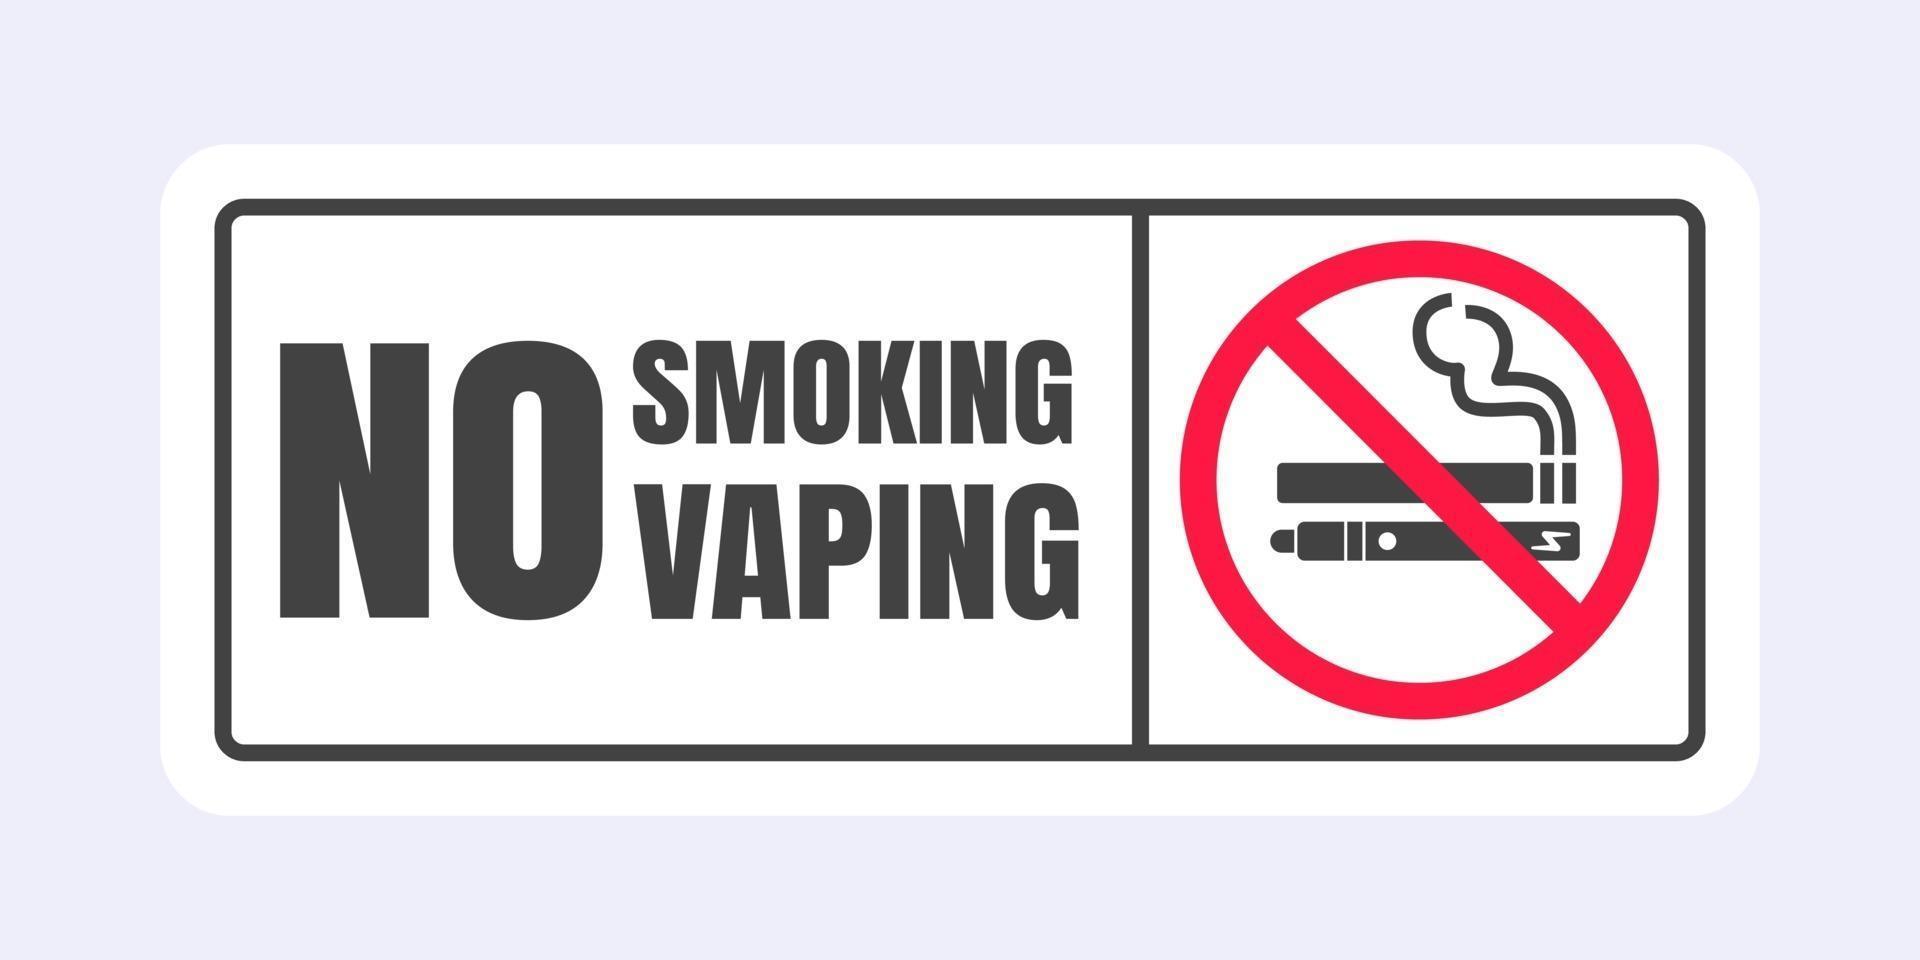 No smoking no vaping sign. Forbidden sign icon isolated on white background vector illustration.